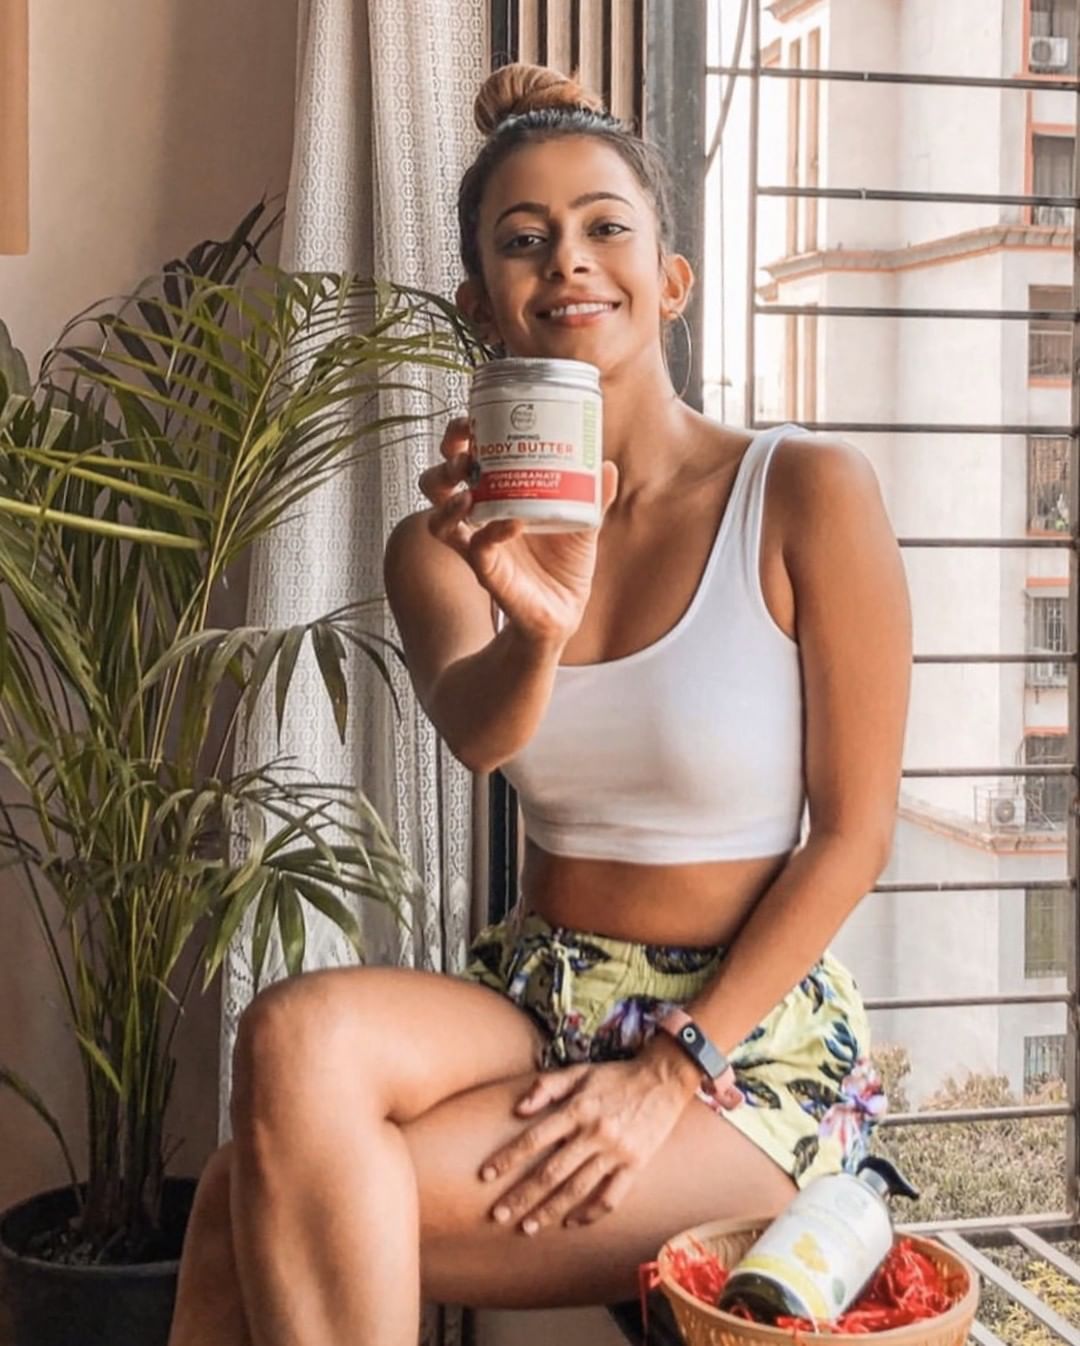 Petal Fresh® - "The Body Butter is my new fav, the product is so hydrating an so smooth to apply, It leaves my skin feeling soft and smooth after every application." - Adalina Angelo
.
📸 by @adlinaang...